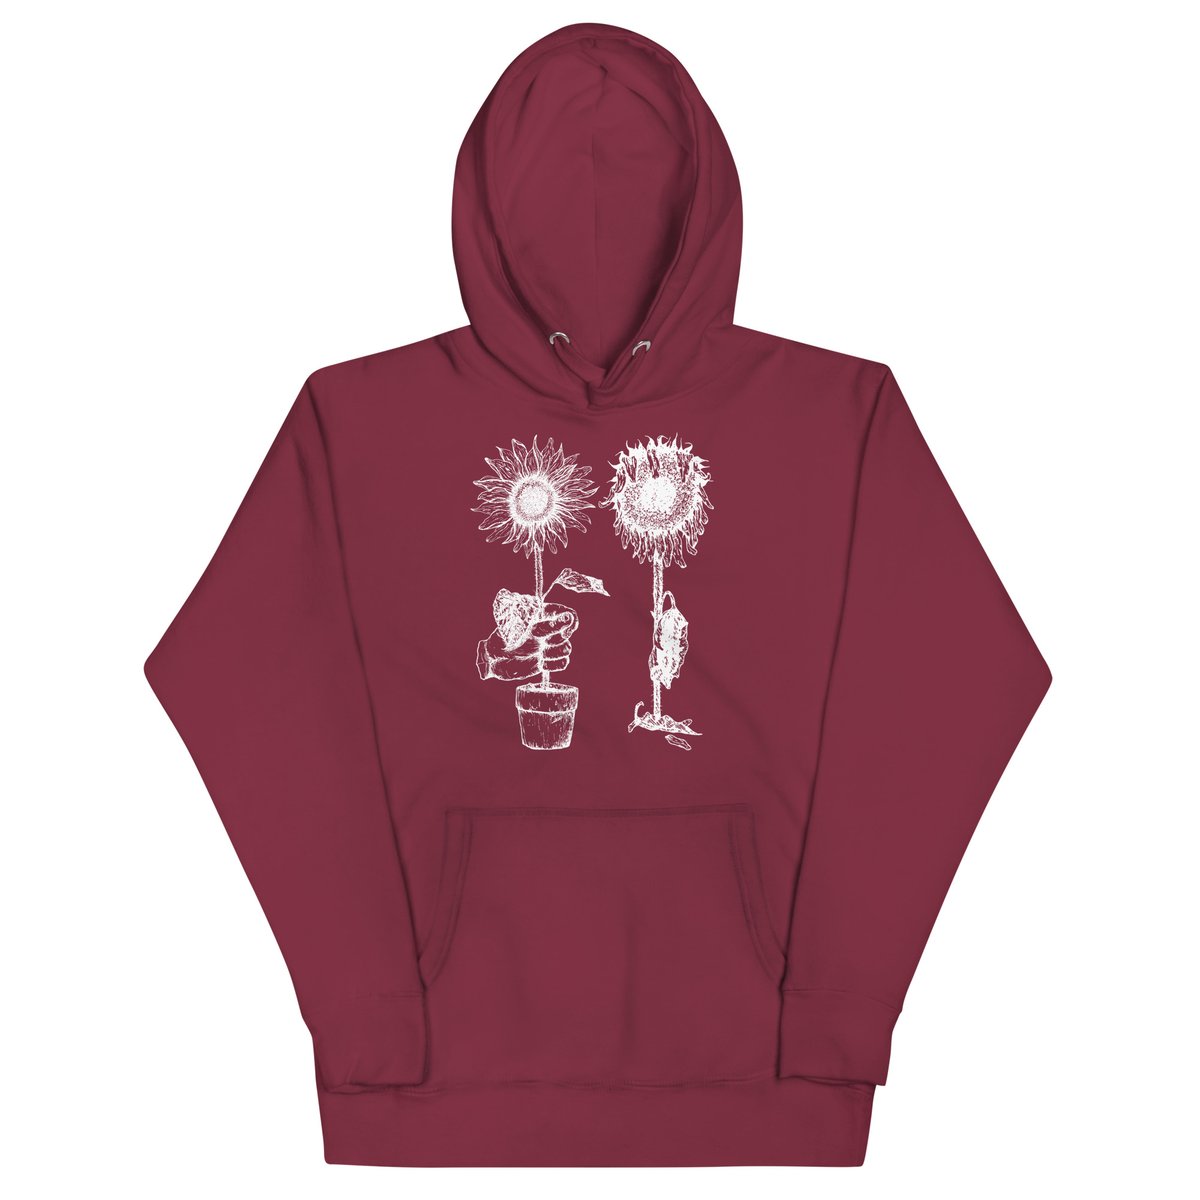 Image of All's Well / Ends Well Hooded Sweatshirt (5 Colors)